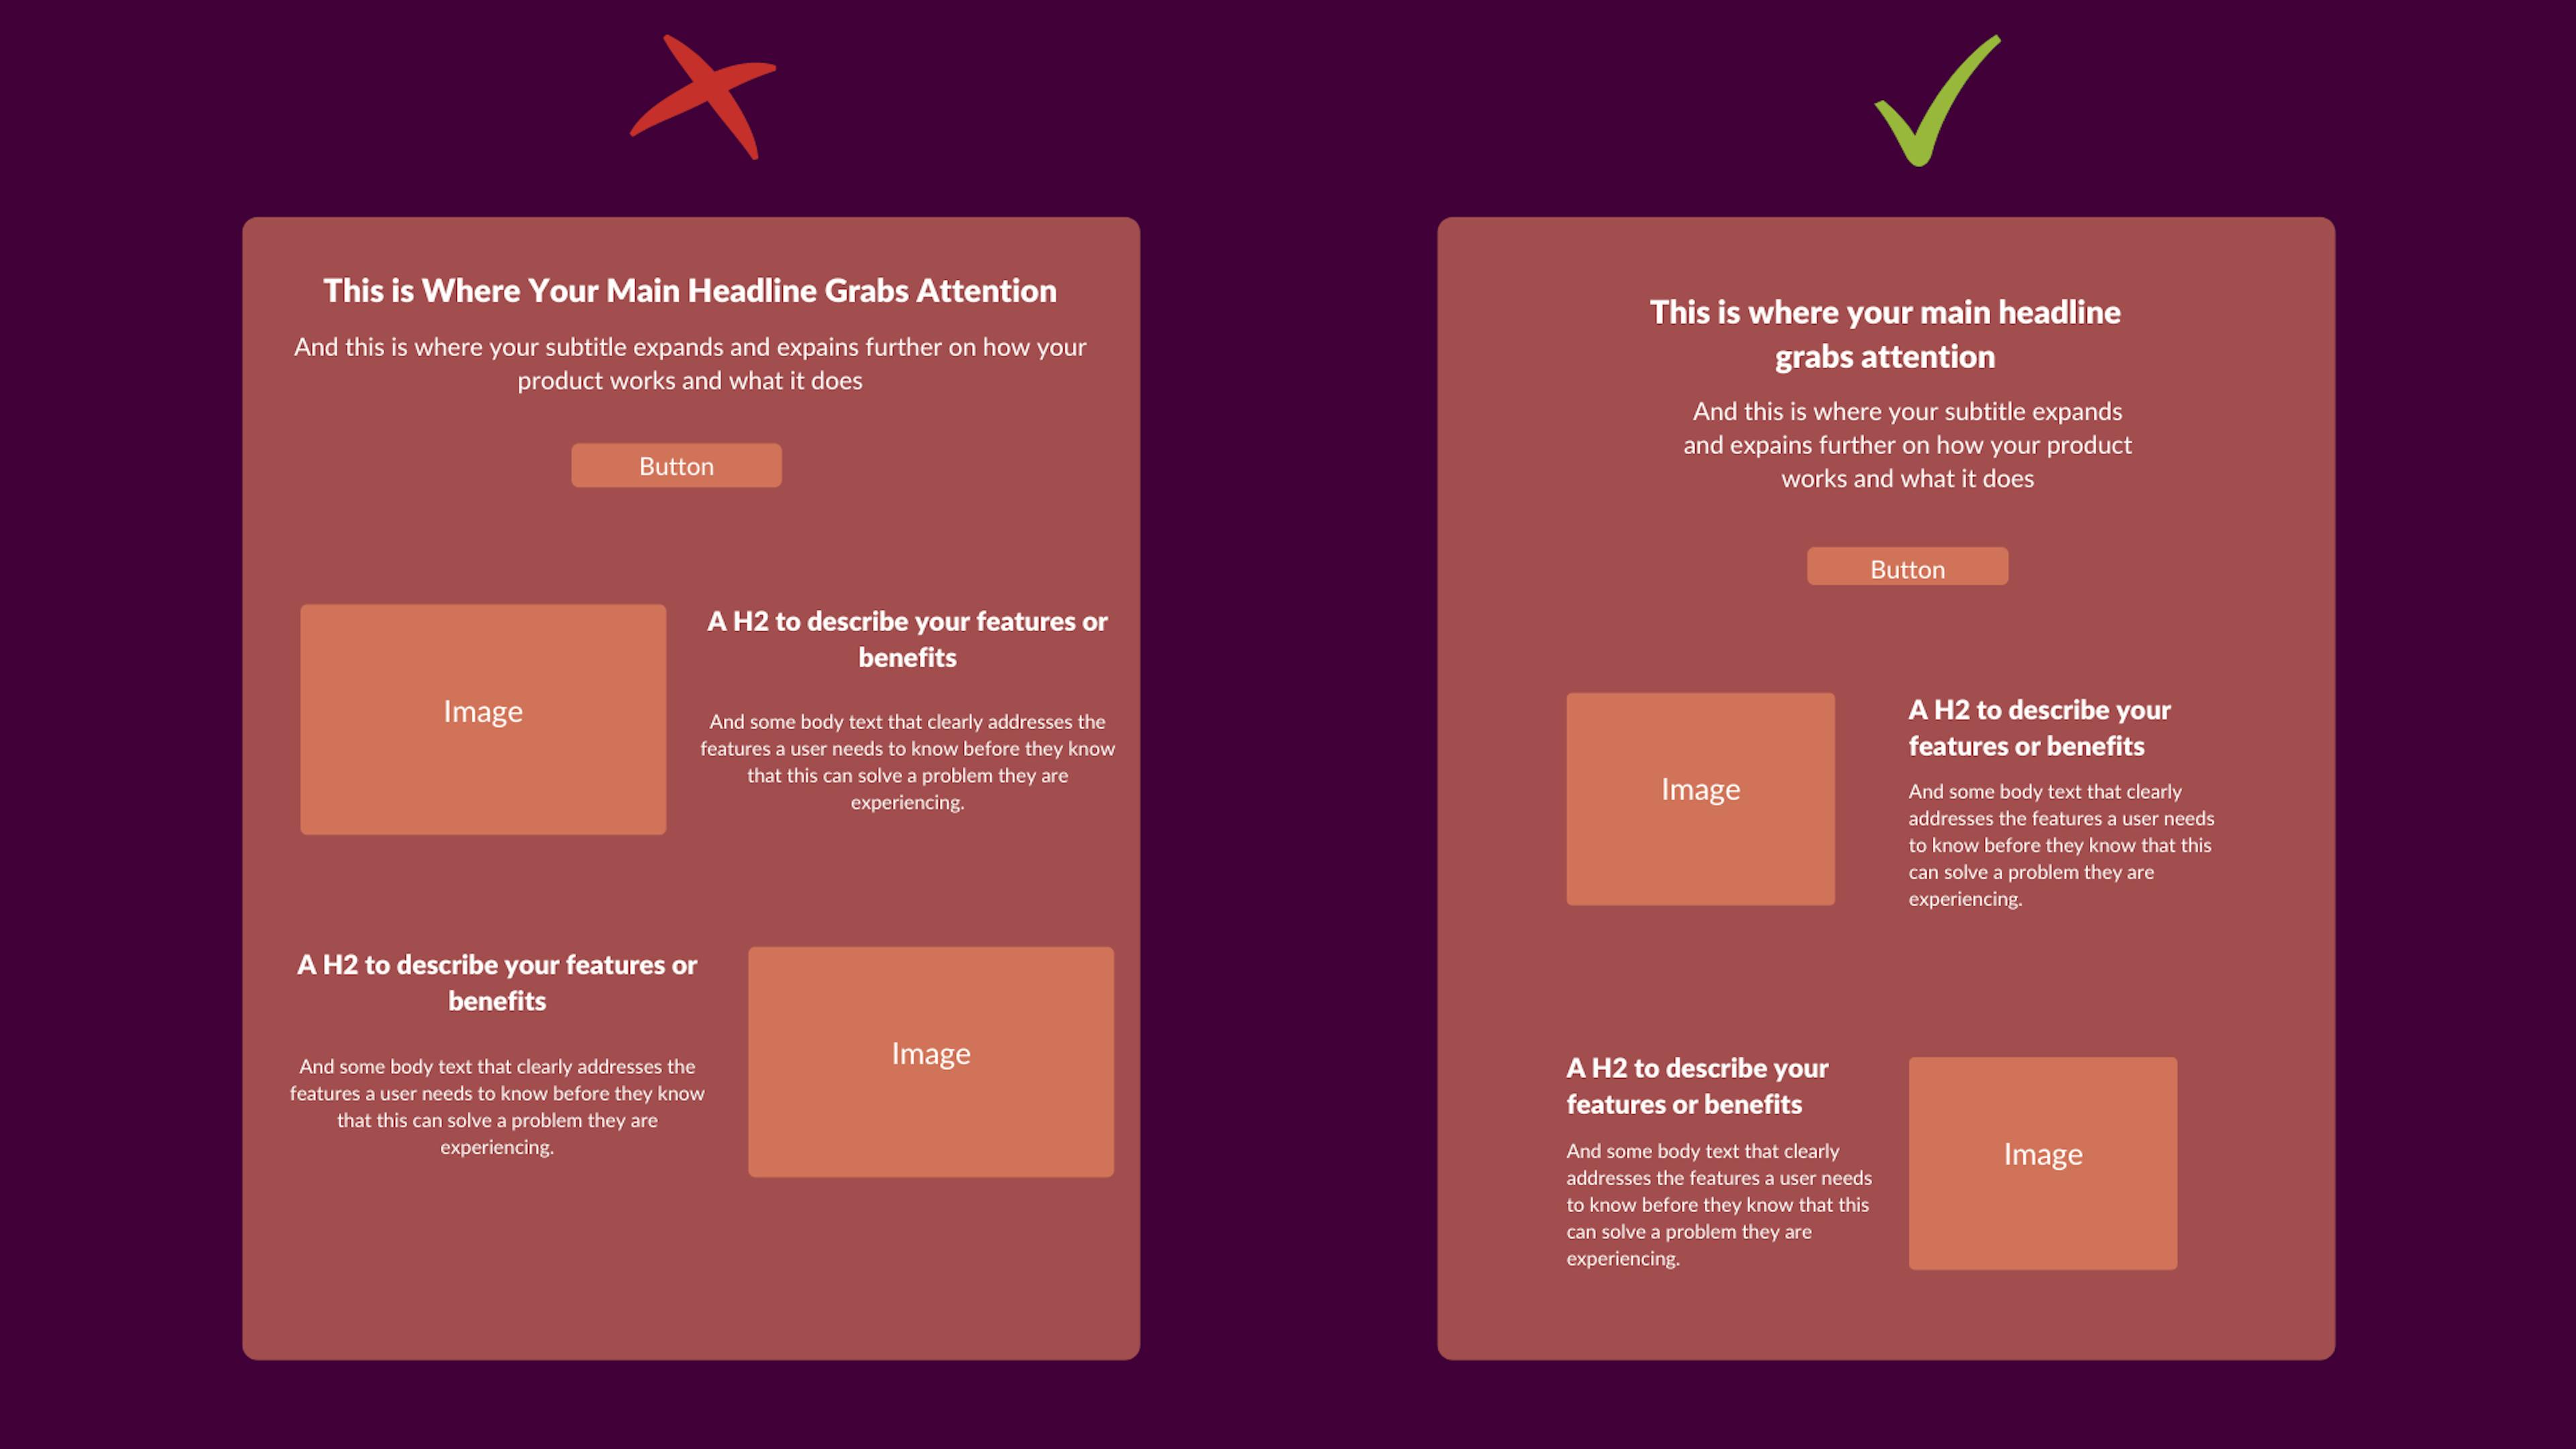 Make your startup's landing page easy to read